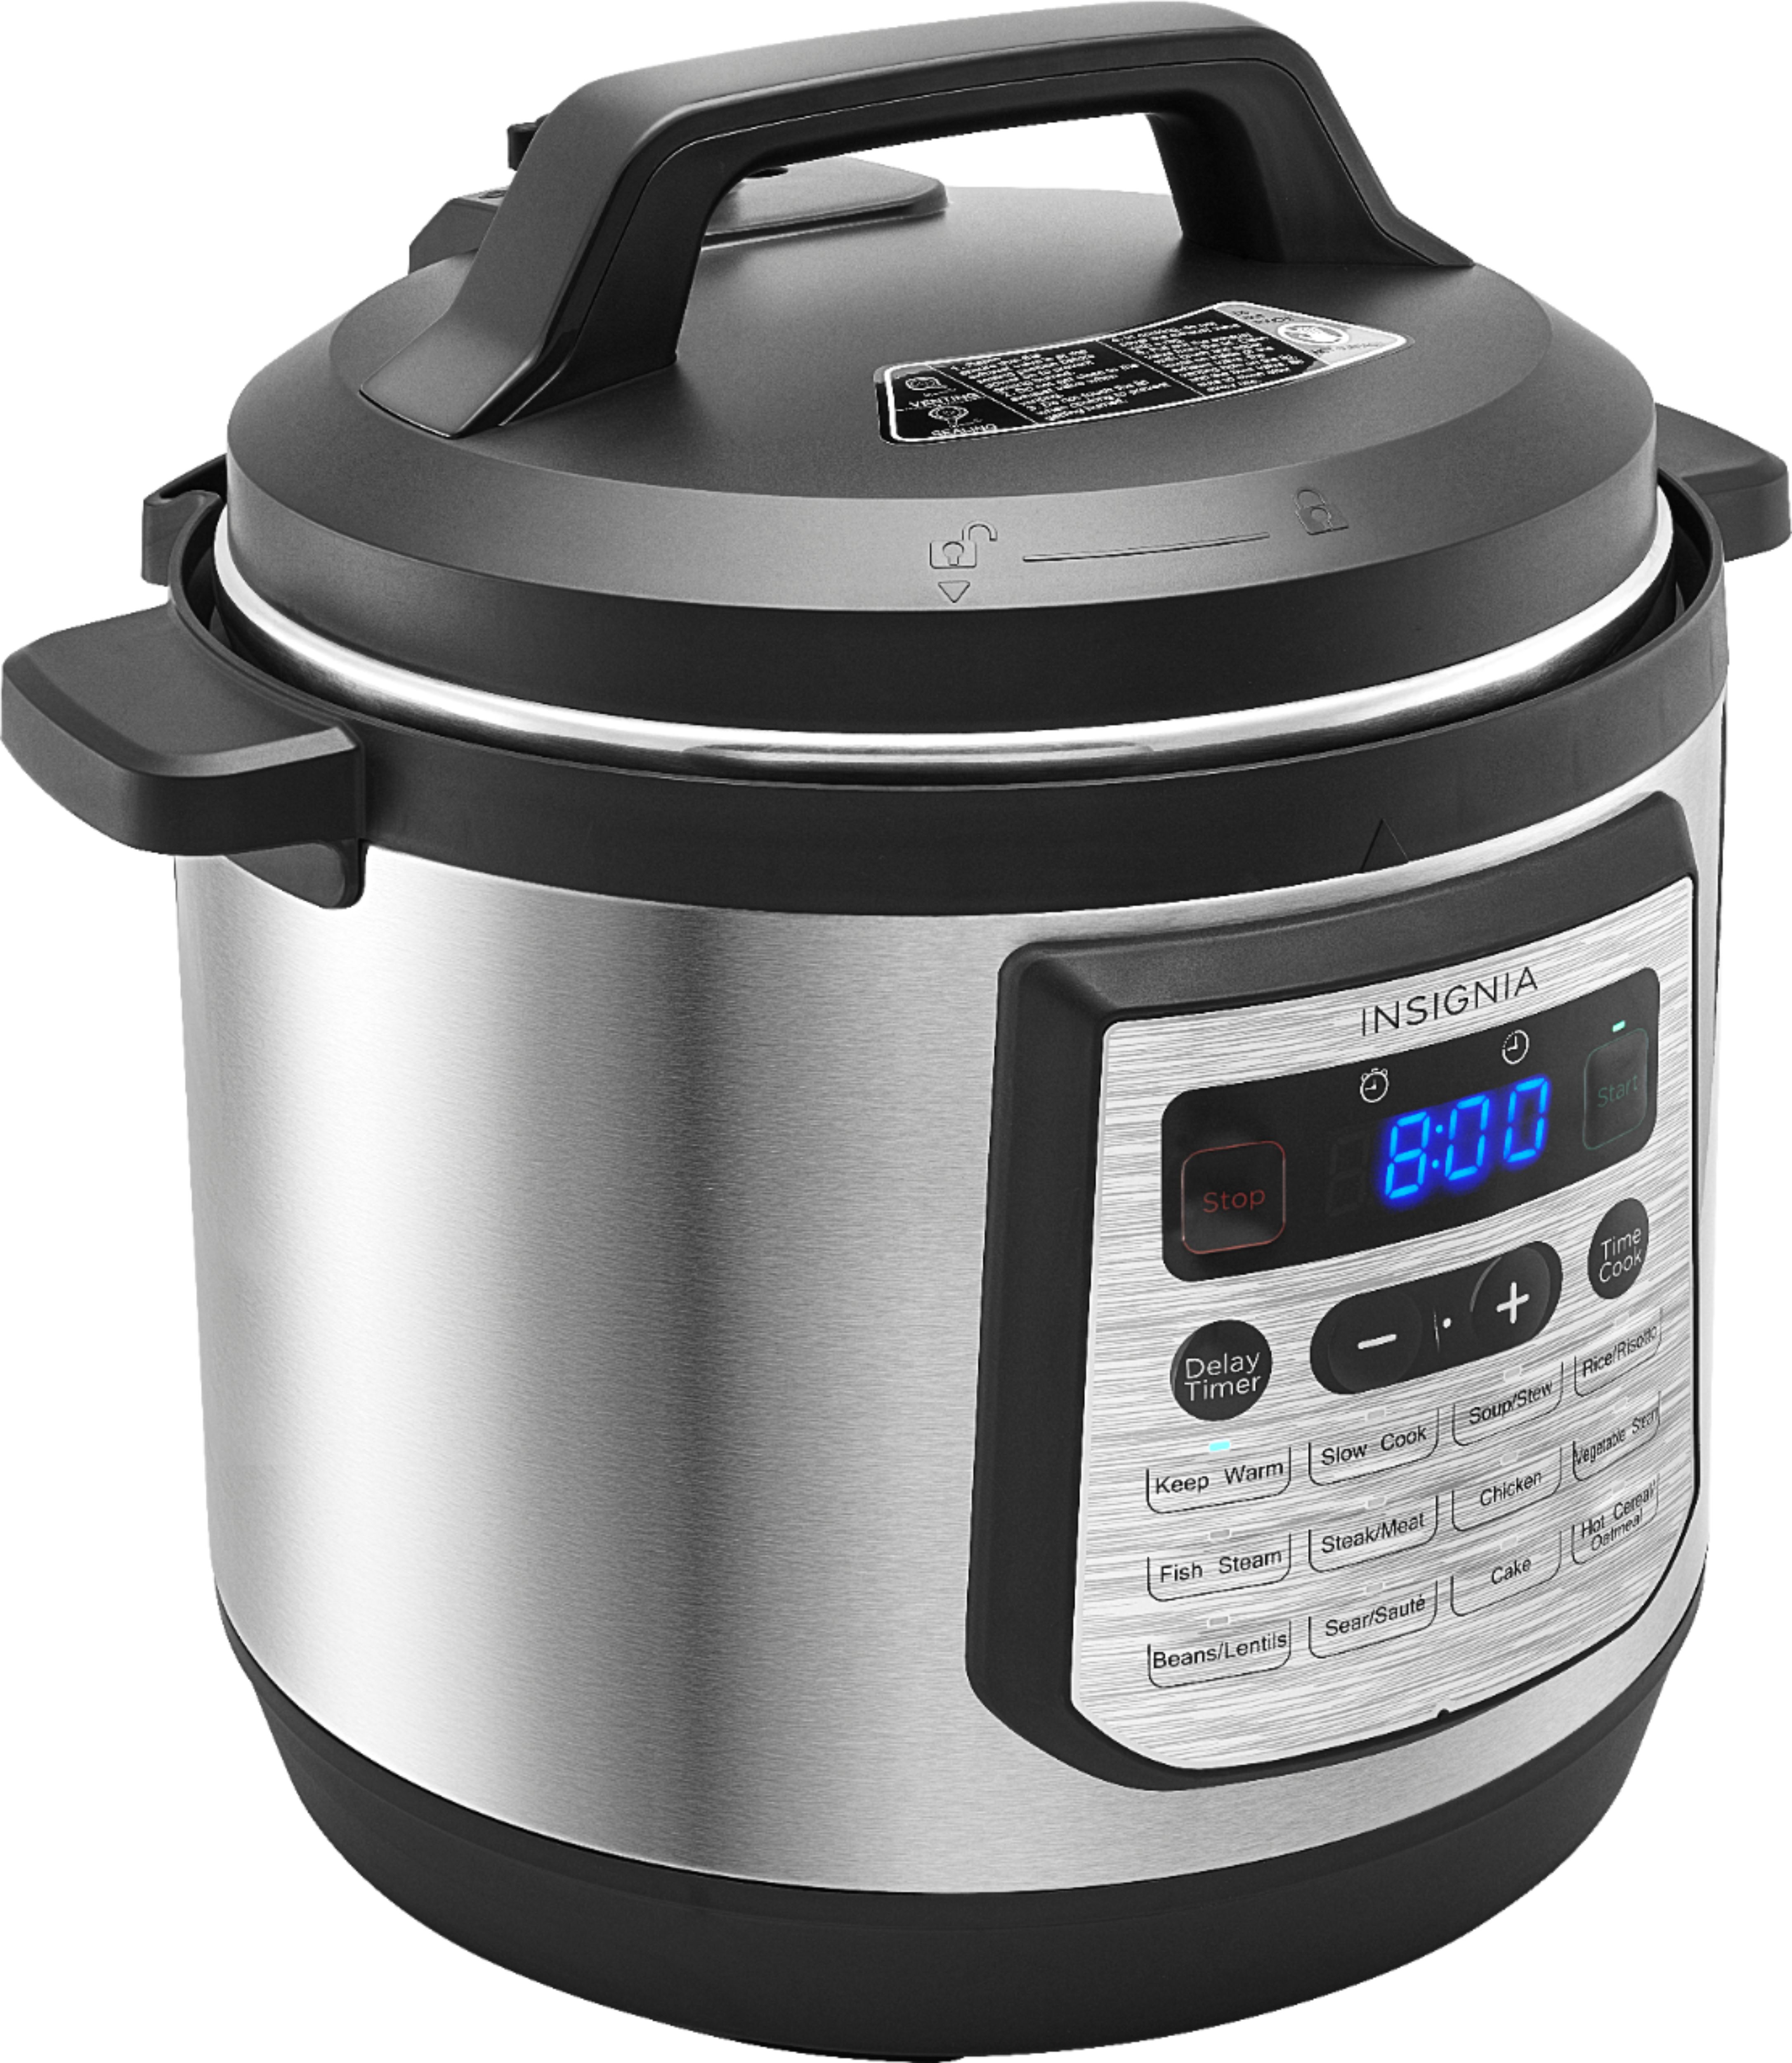 Insignia™ - 8-Quart Multi-Function Pressure Cooker - Stainless Steel